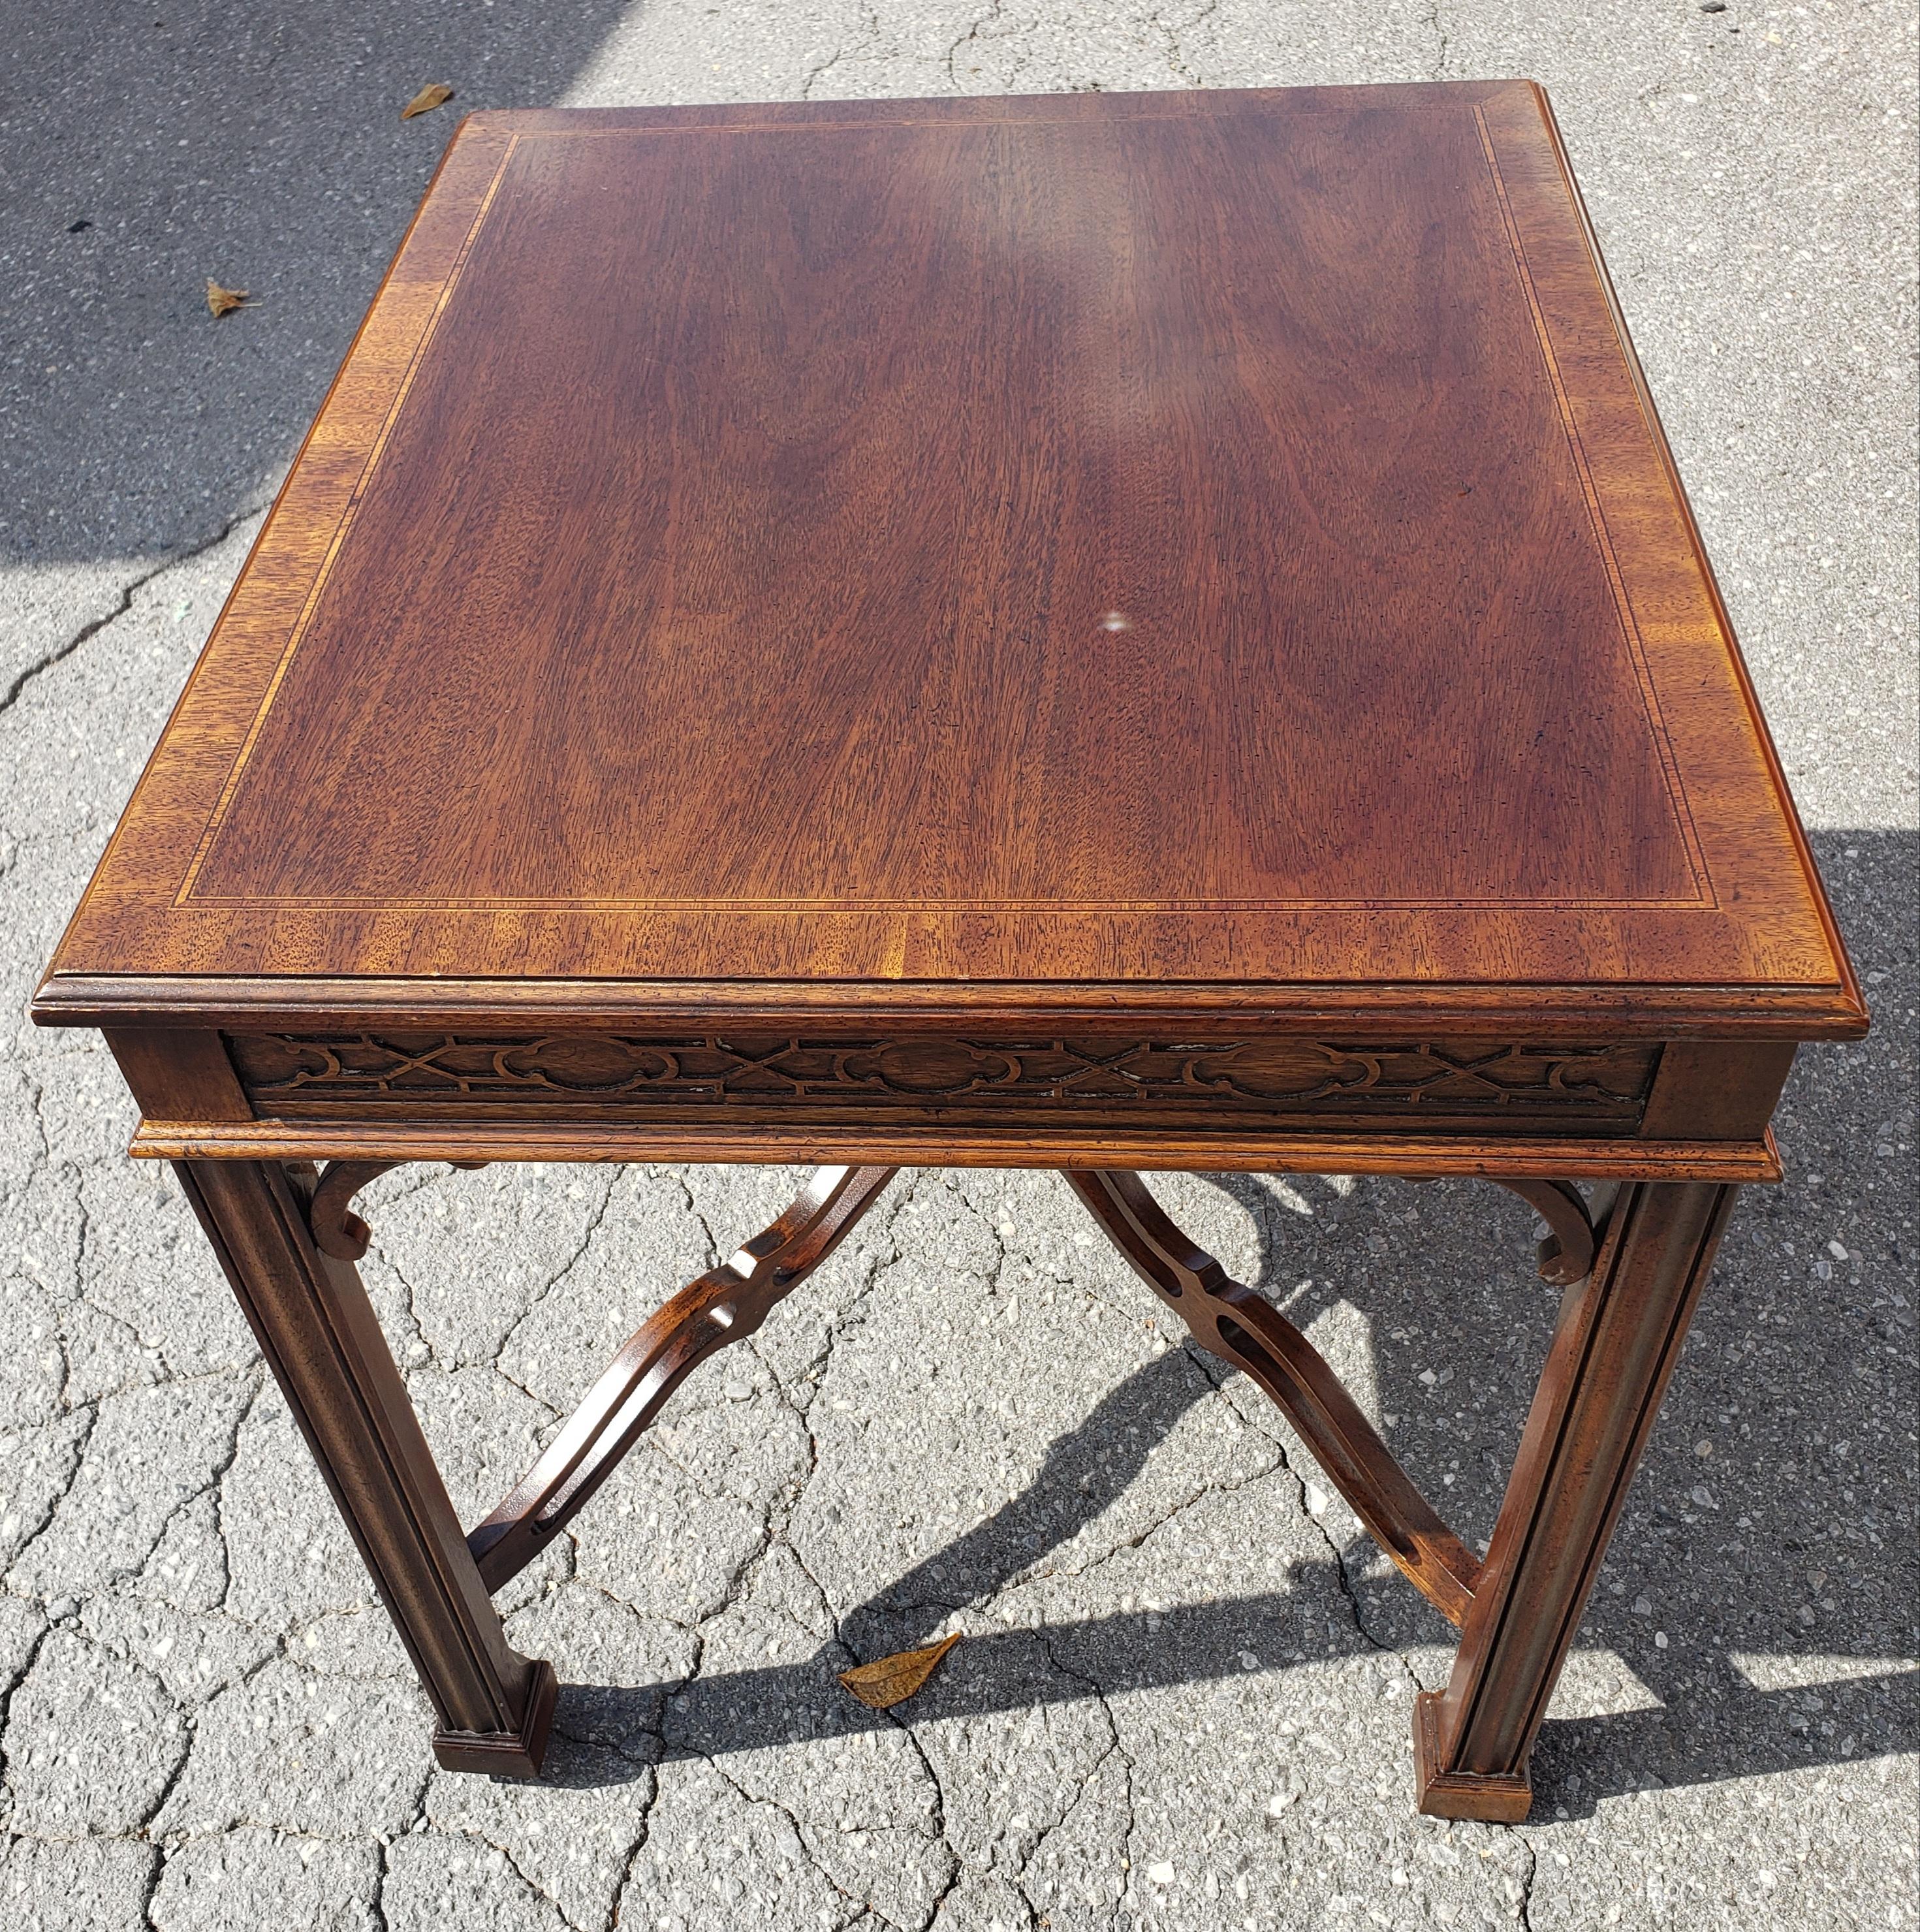 1980s Drexel Heritage Chippendale Walnut Accent Table W/ Fretwork and Banded Top For Sale 3